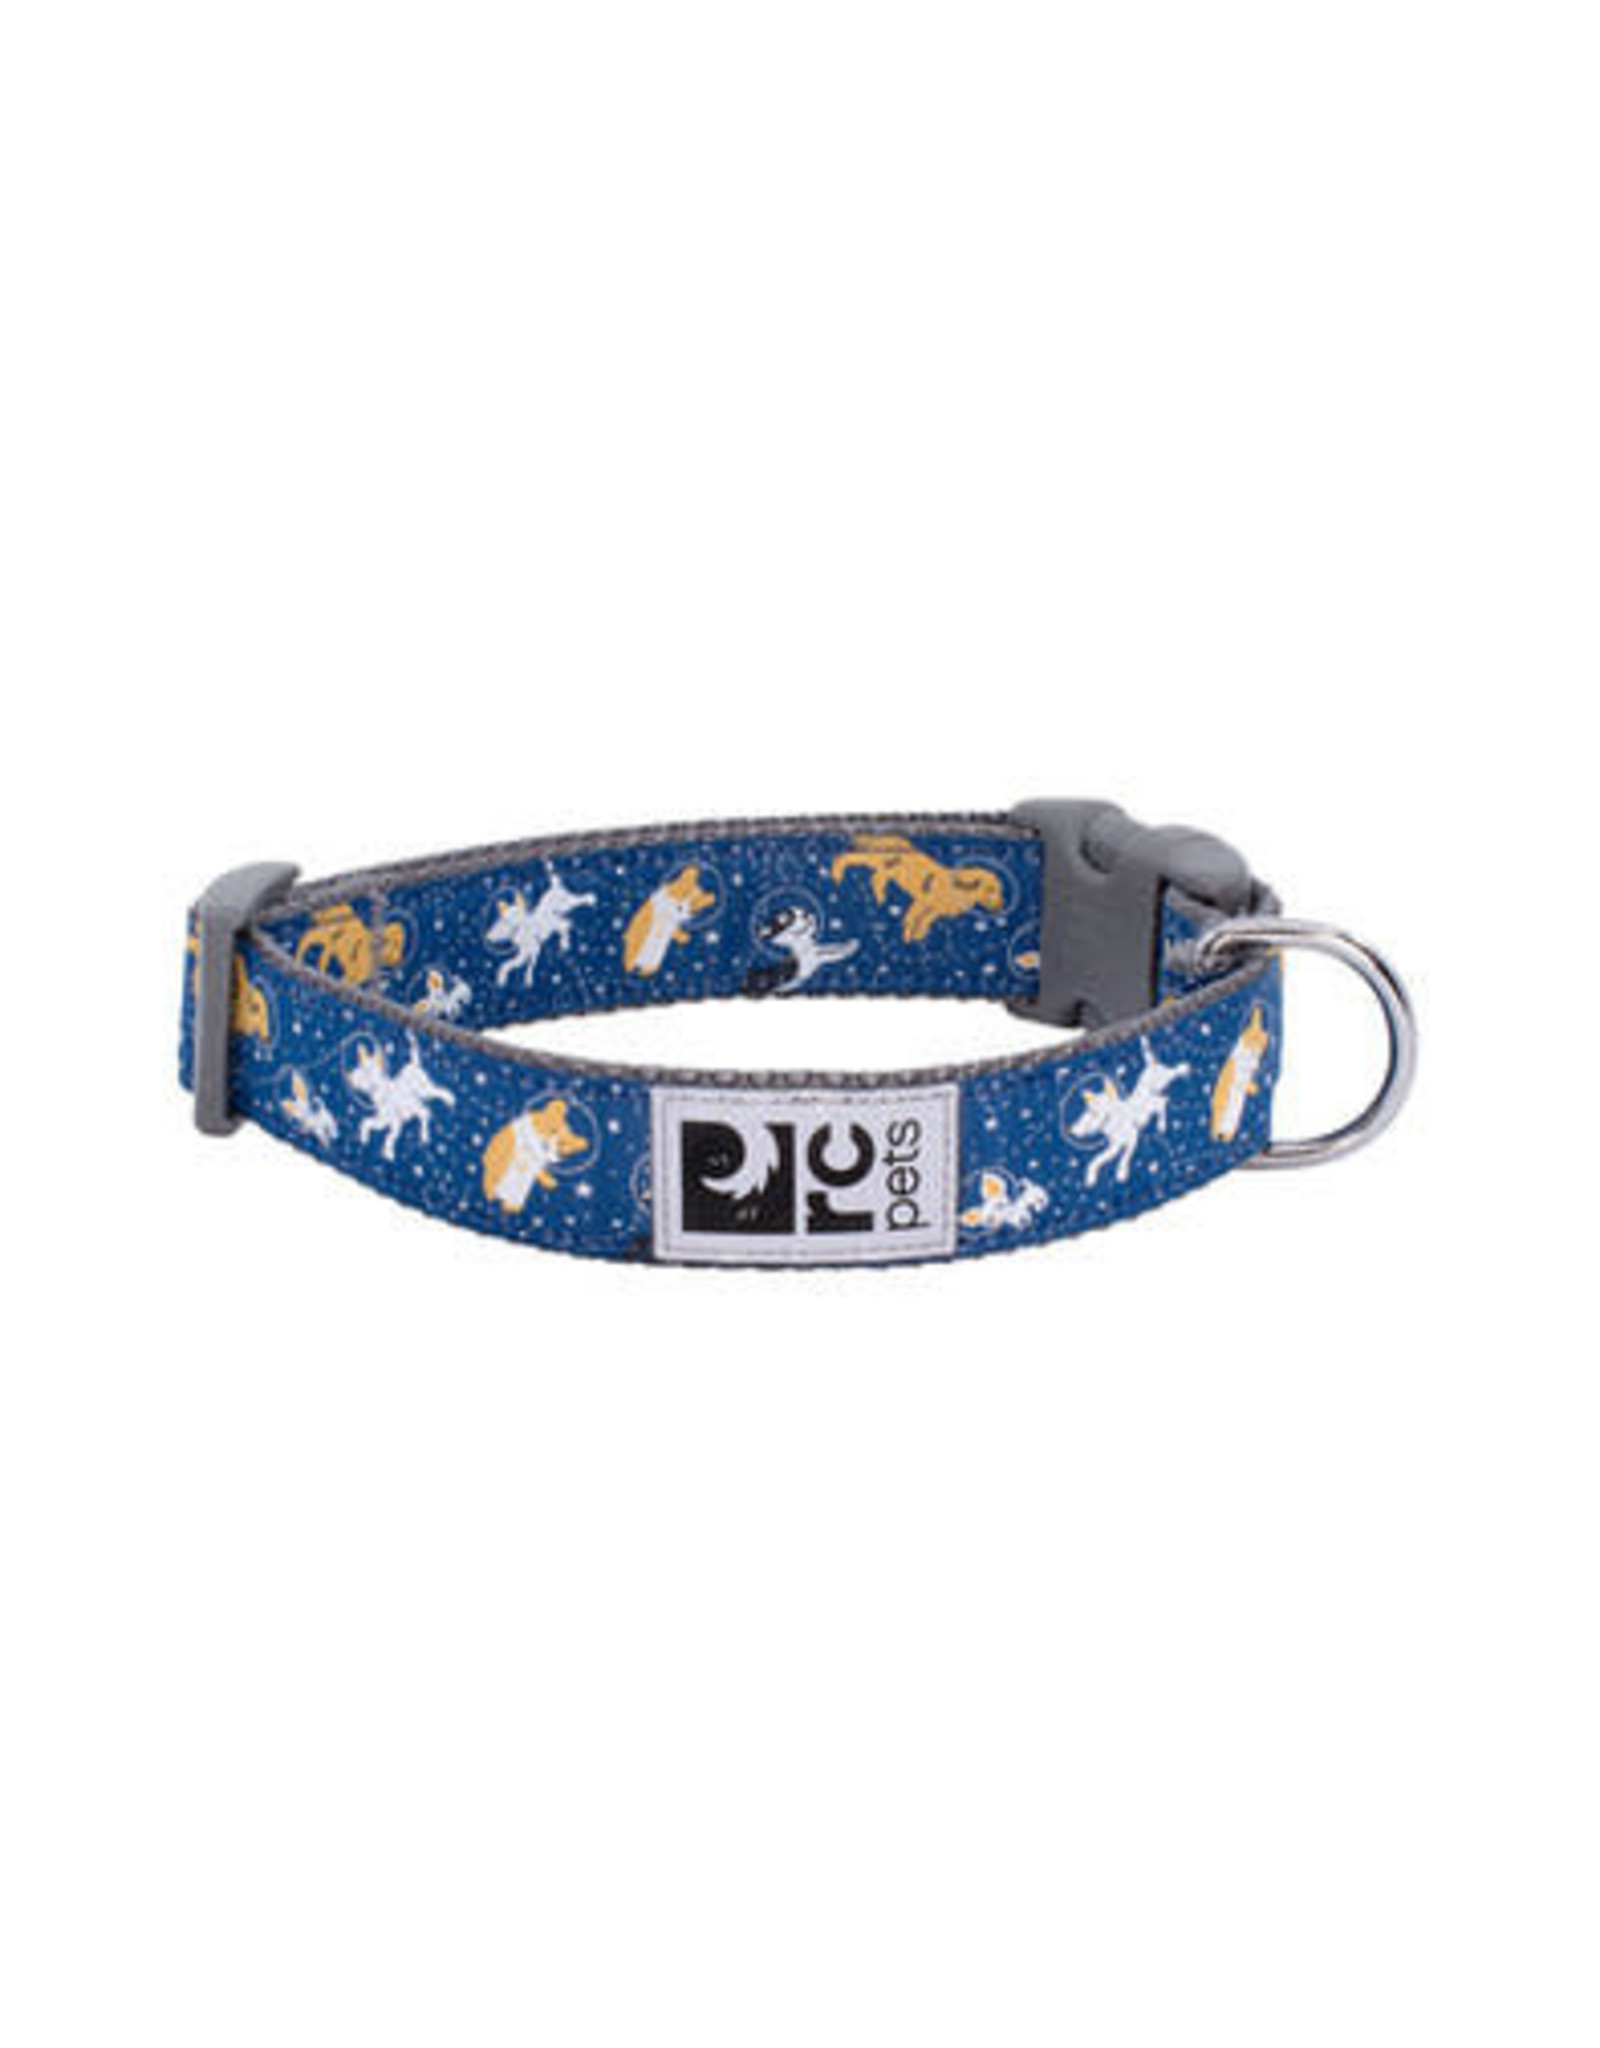 RC Pets Clip Collar - Space Dogs